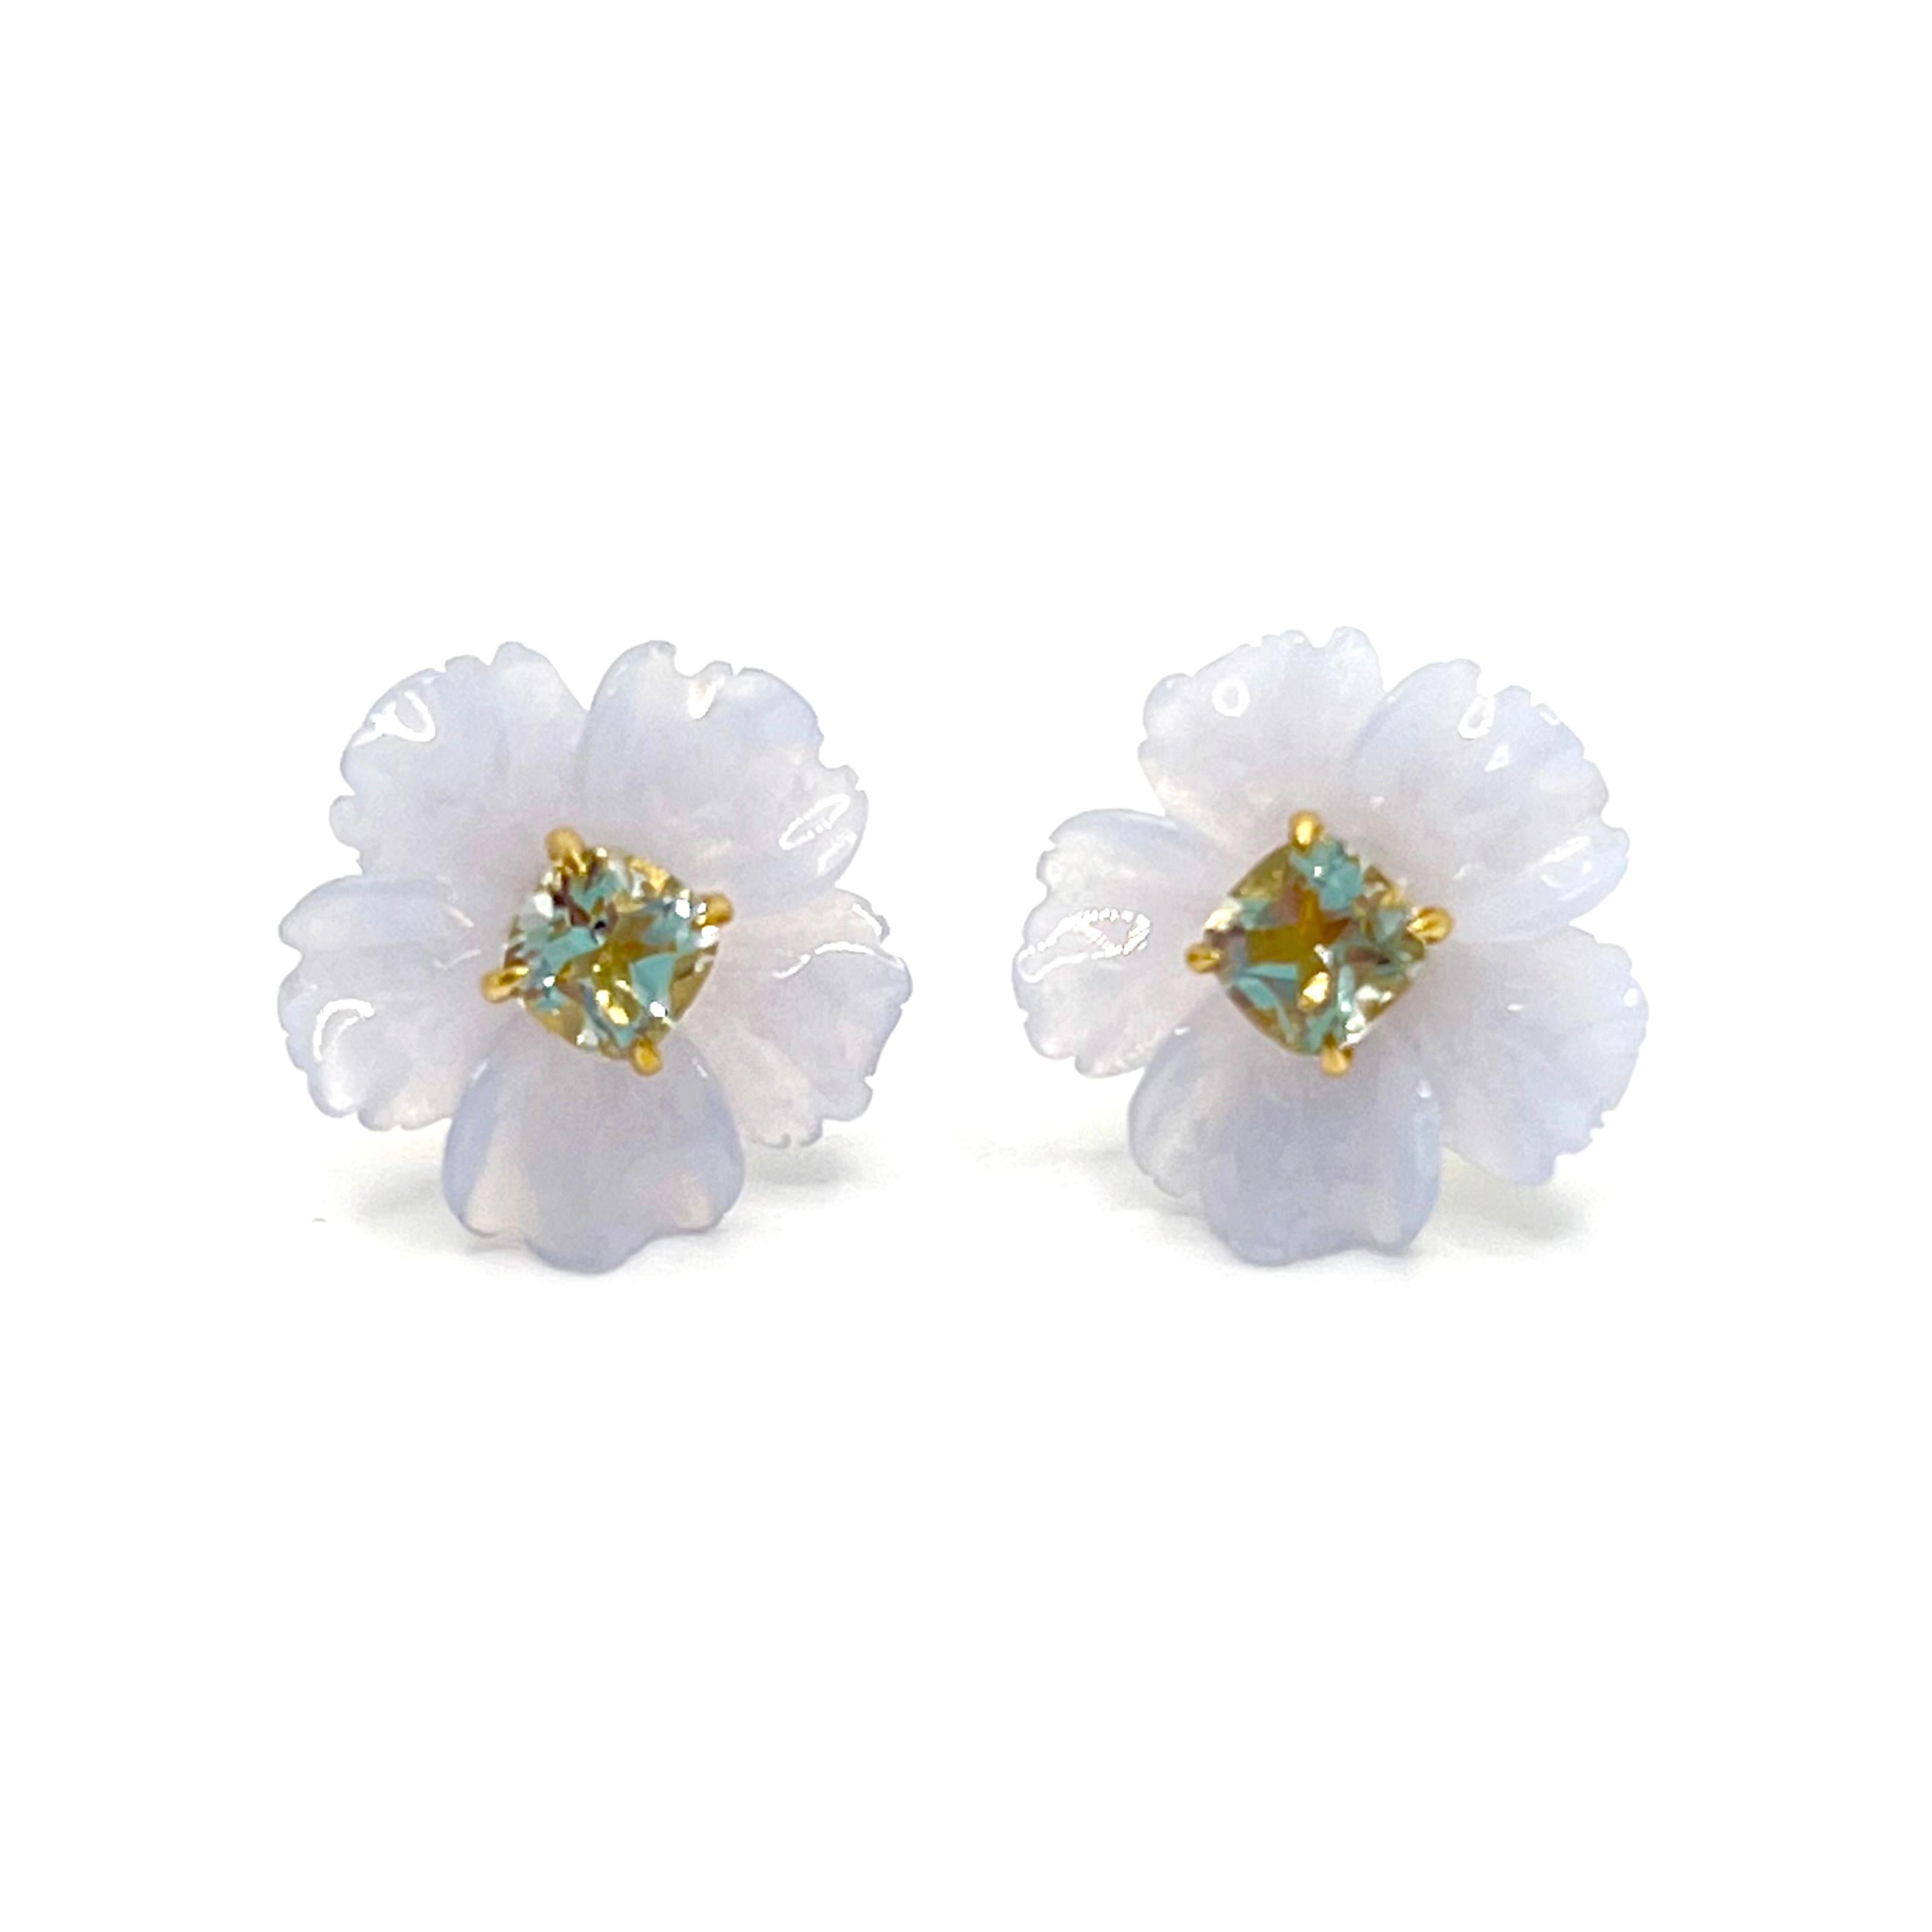 Bijoux Num's 15mm Carved Chalcedony Flower and Cushion Prasiolite Vermeil Earrings

This gorgeous pair of earrings features 15mm periwinkle purplish-blue chalcedony carved into beautiful three dimension flower, adorned with cushion-cut pastel green